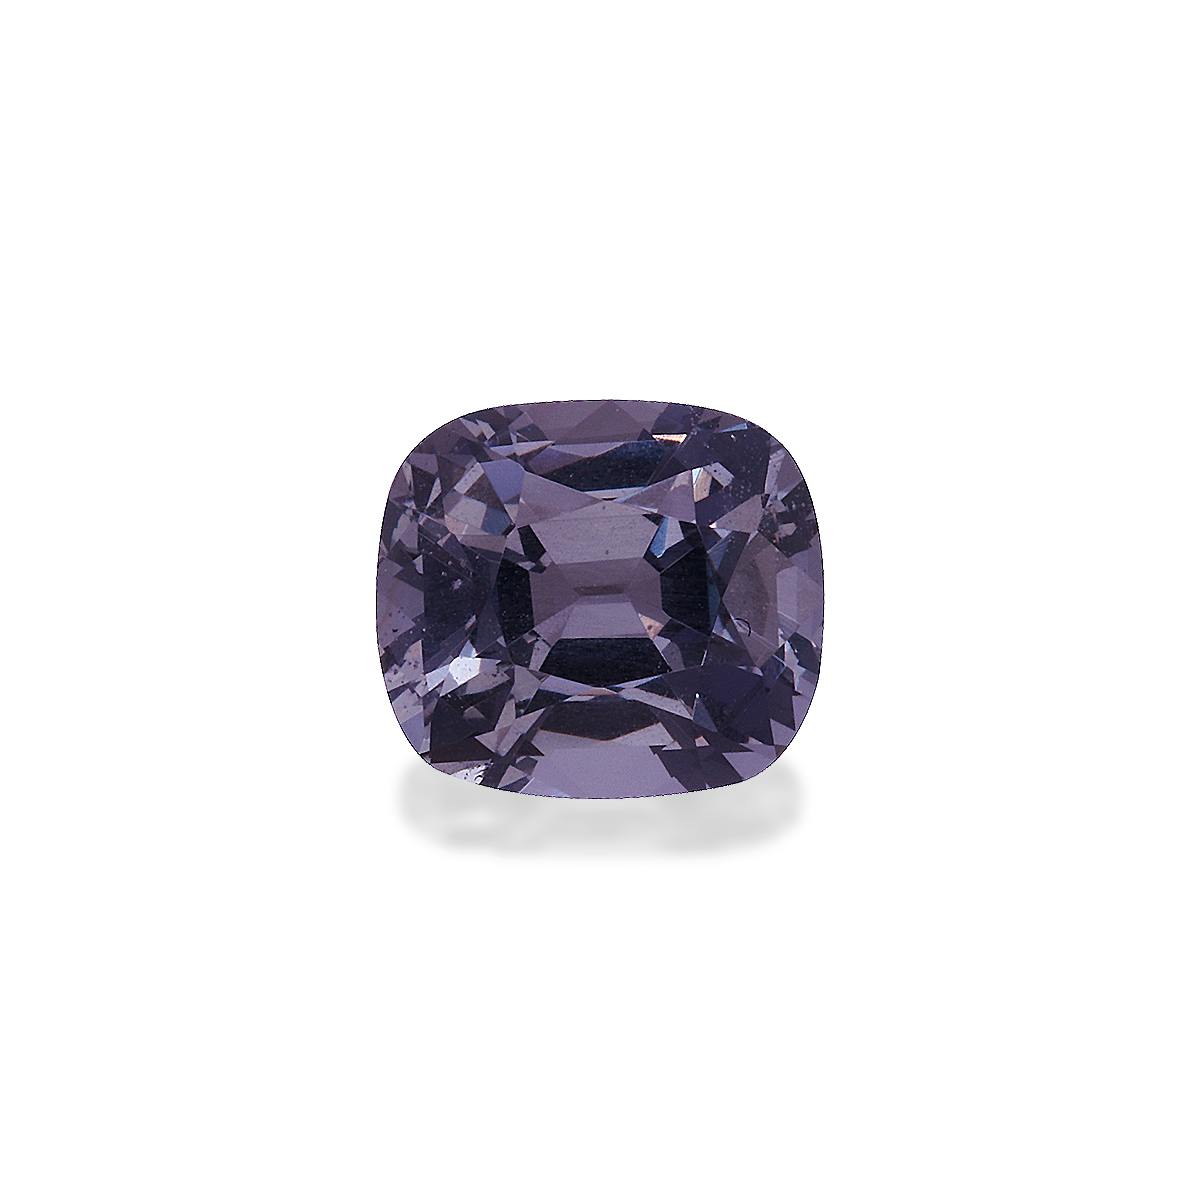 Grey Spinel 1.63ct (SP0235)